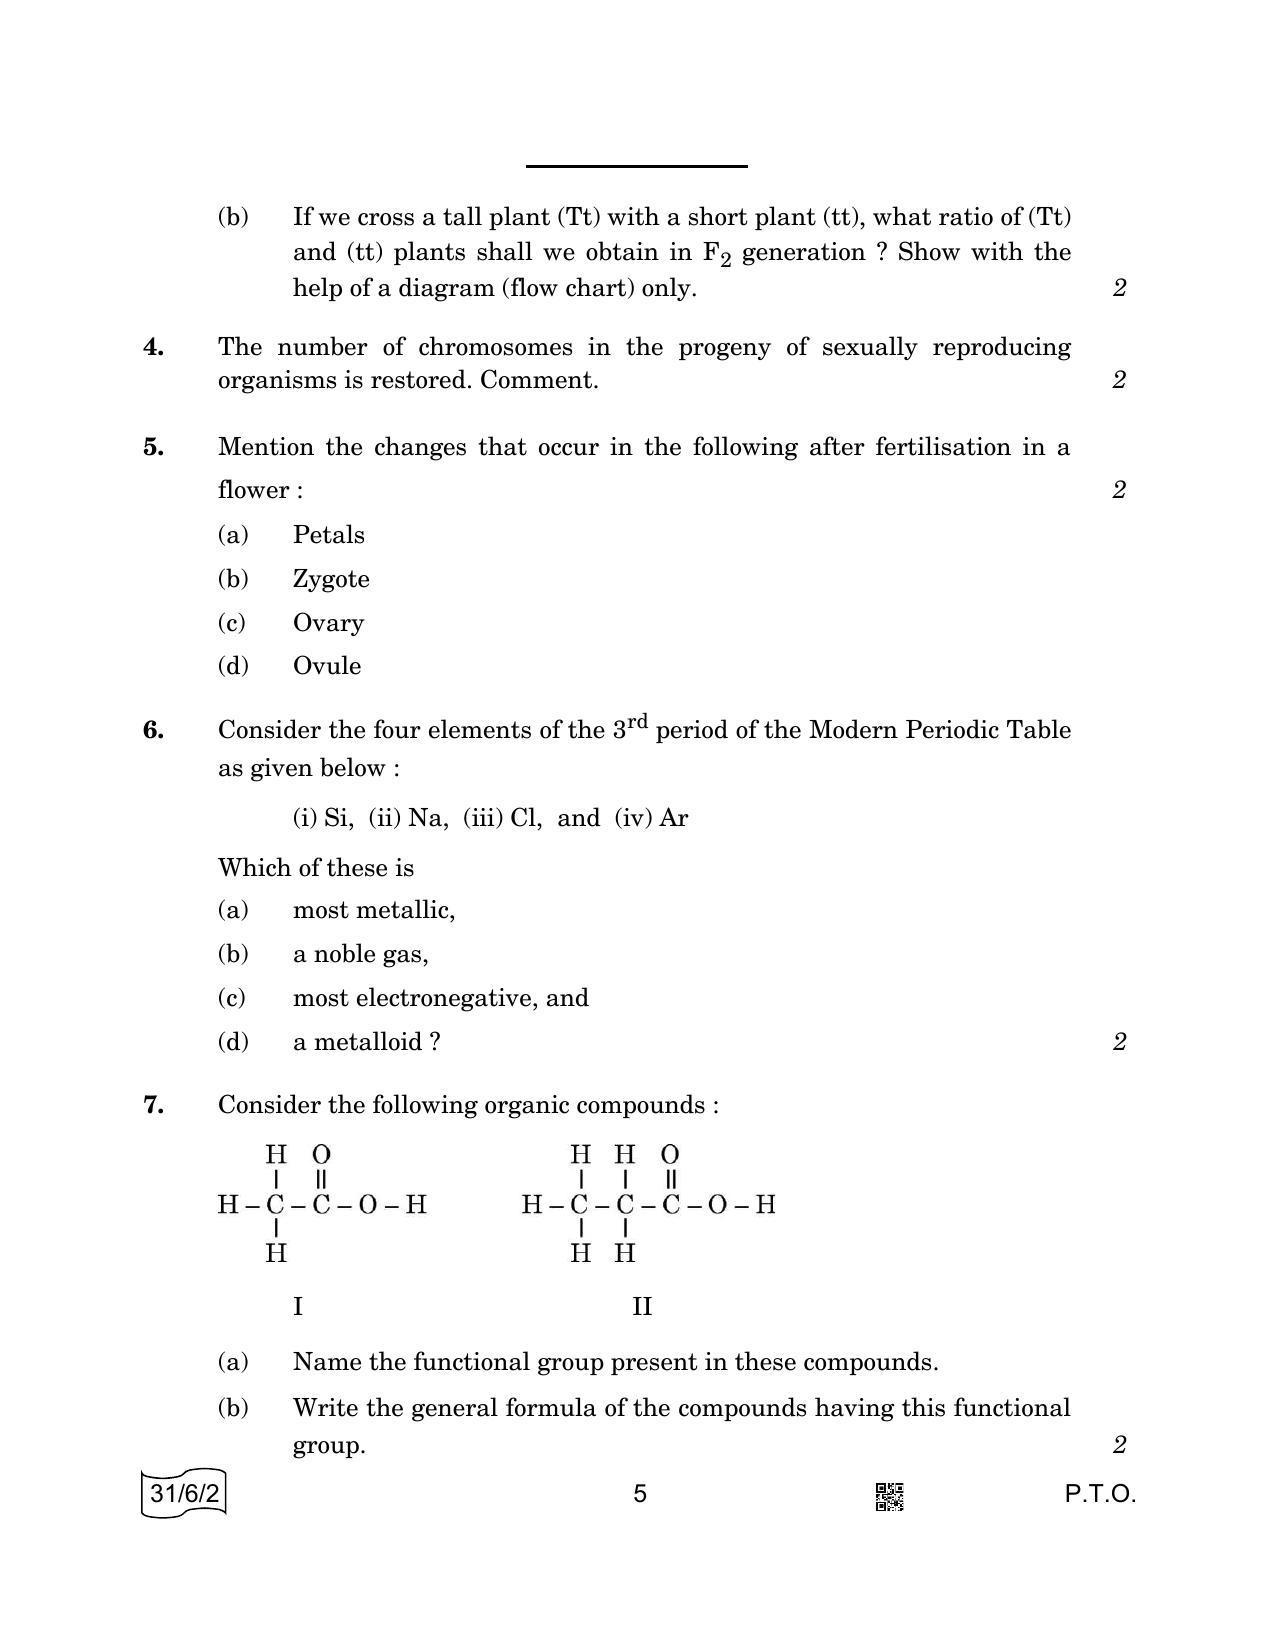 CBSE Class 10 31-6-2 SCIENCE 2022 Compartment Question Paper - Page 5